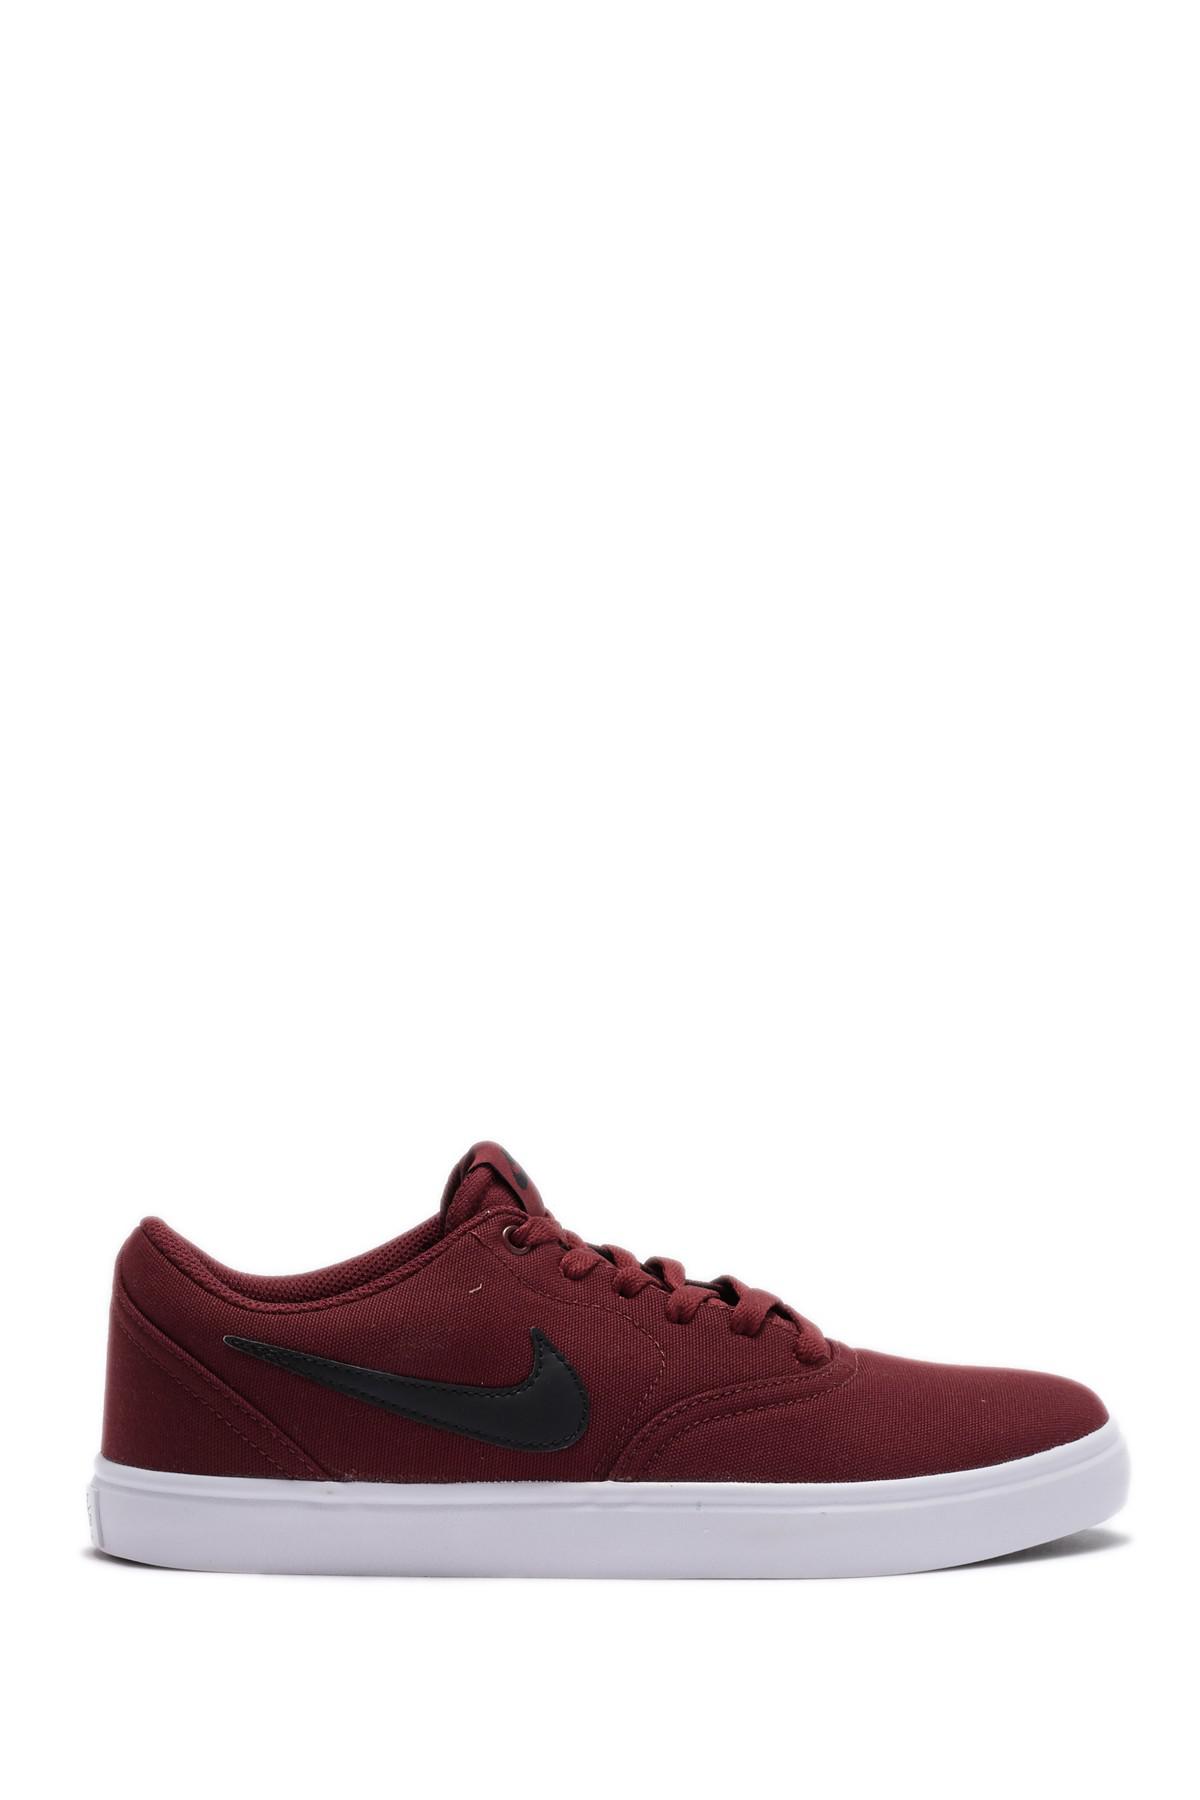 Nike Sb Check Solar Canvas Skate Shoes in Red for Men - Lyst